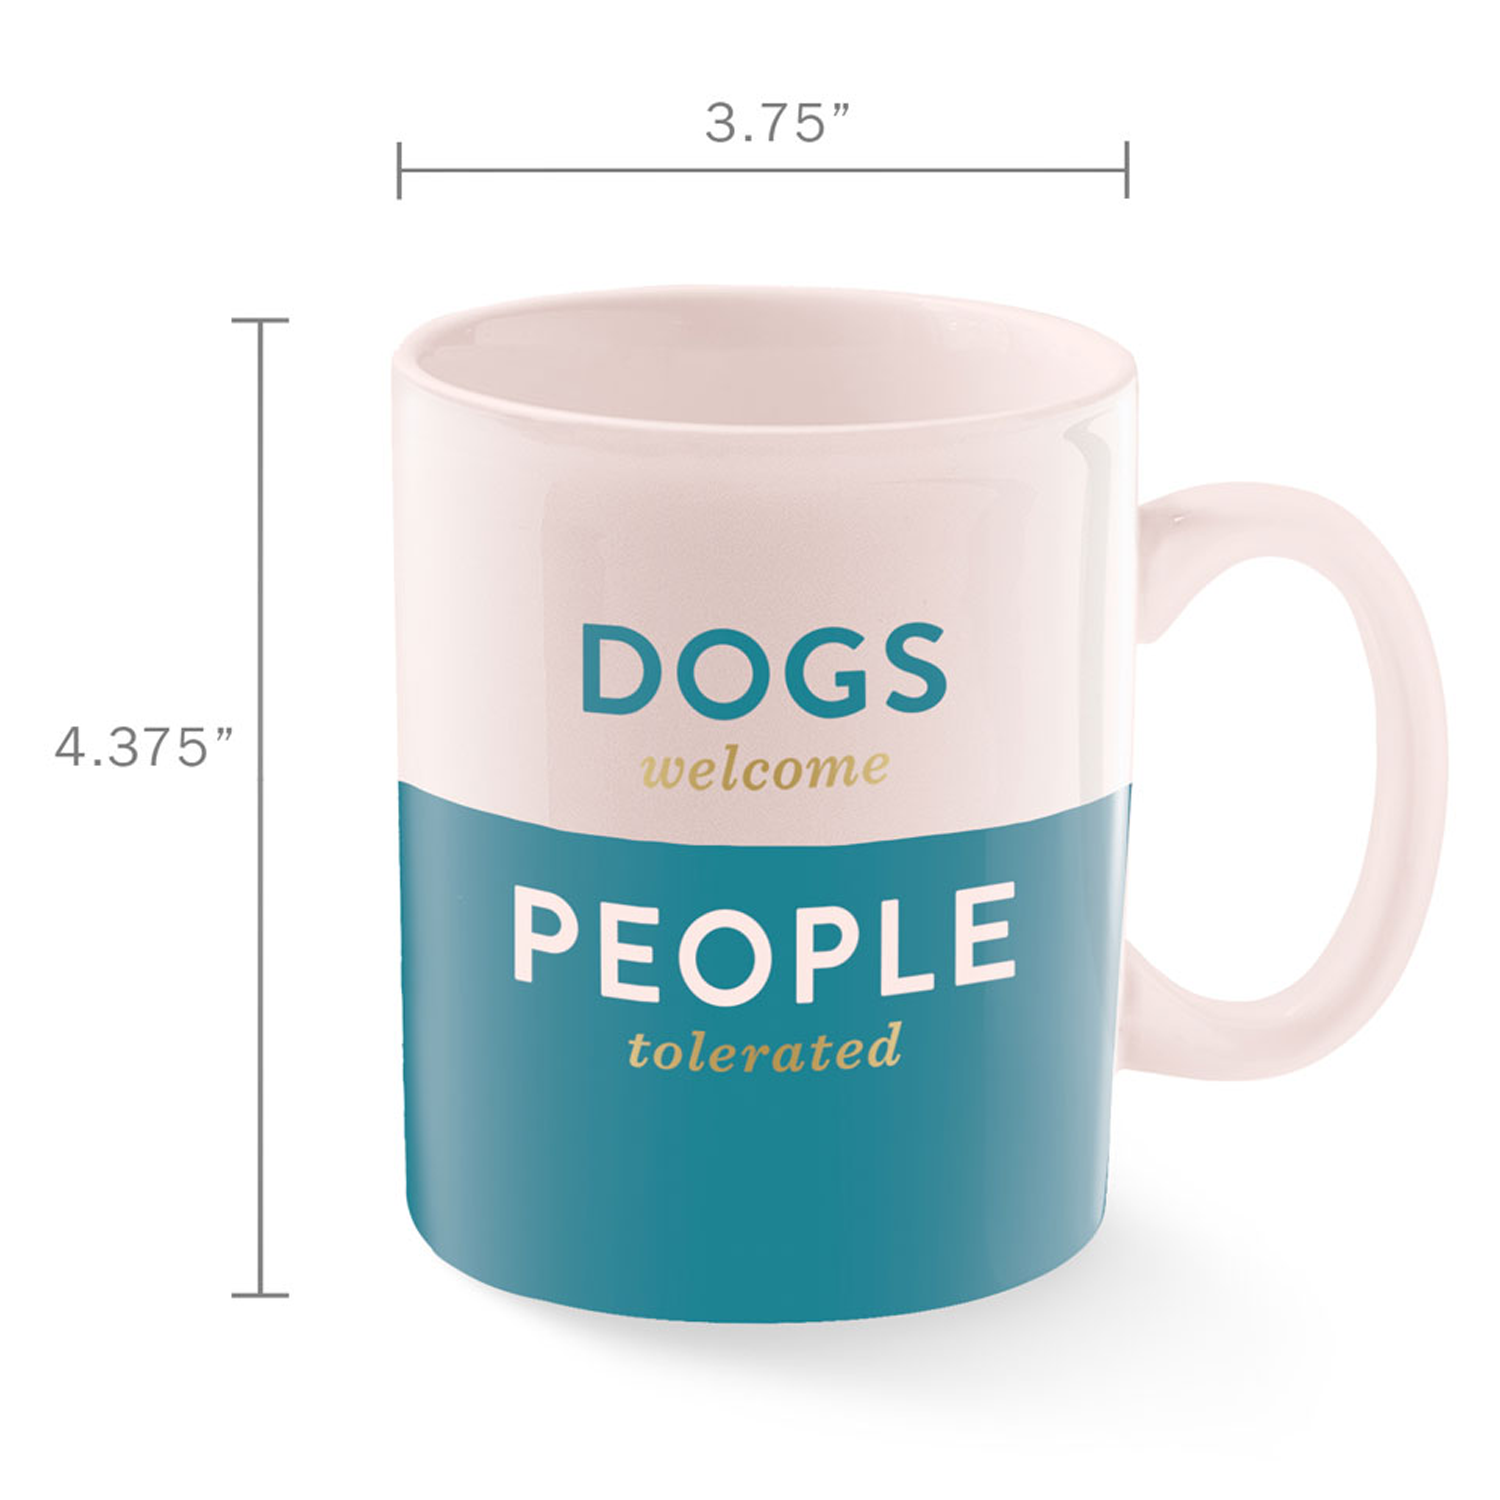 dogs welcome people tolerated pink and blue mug dimensions